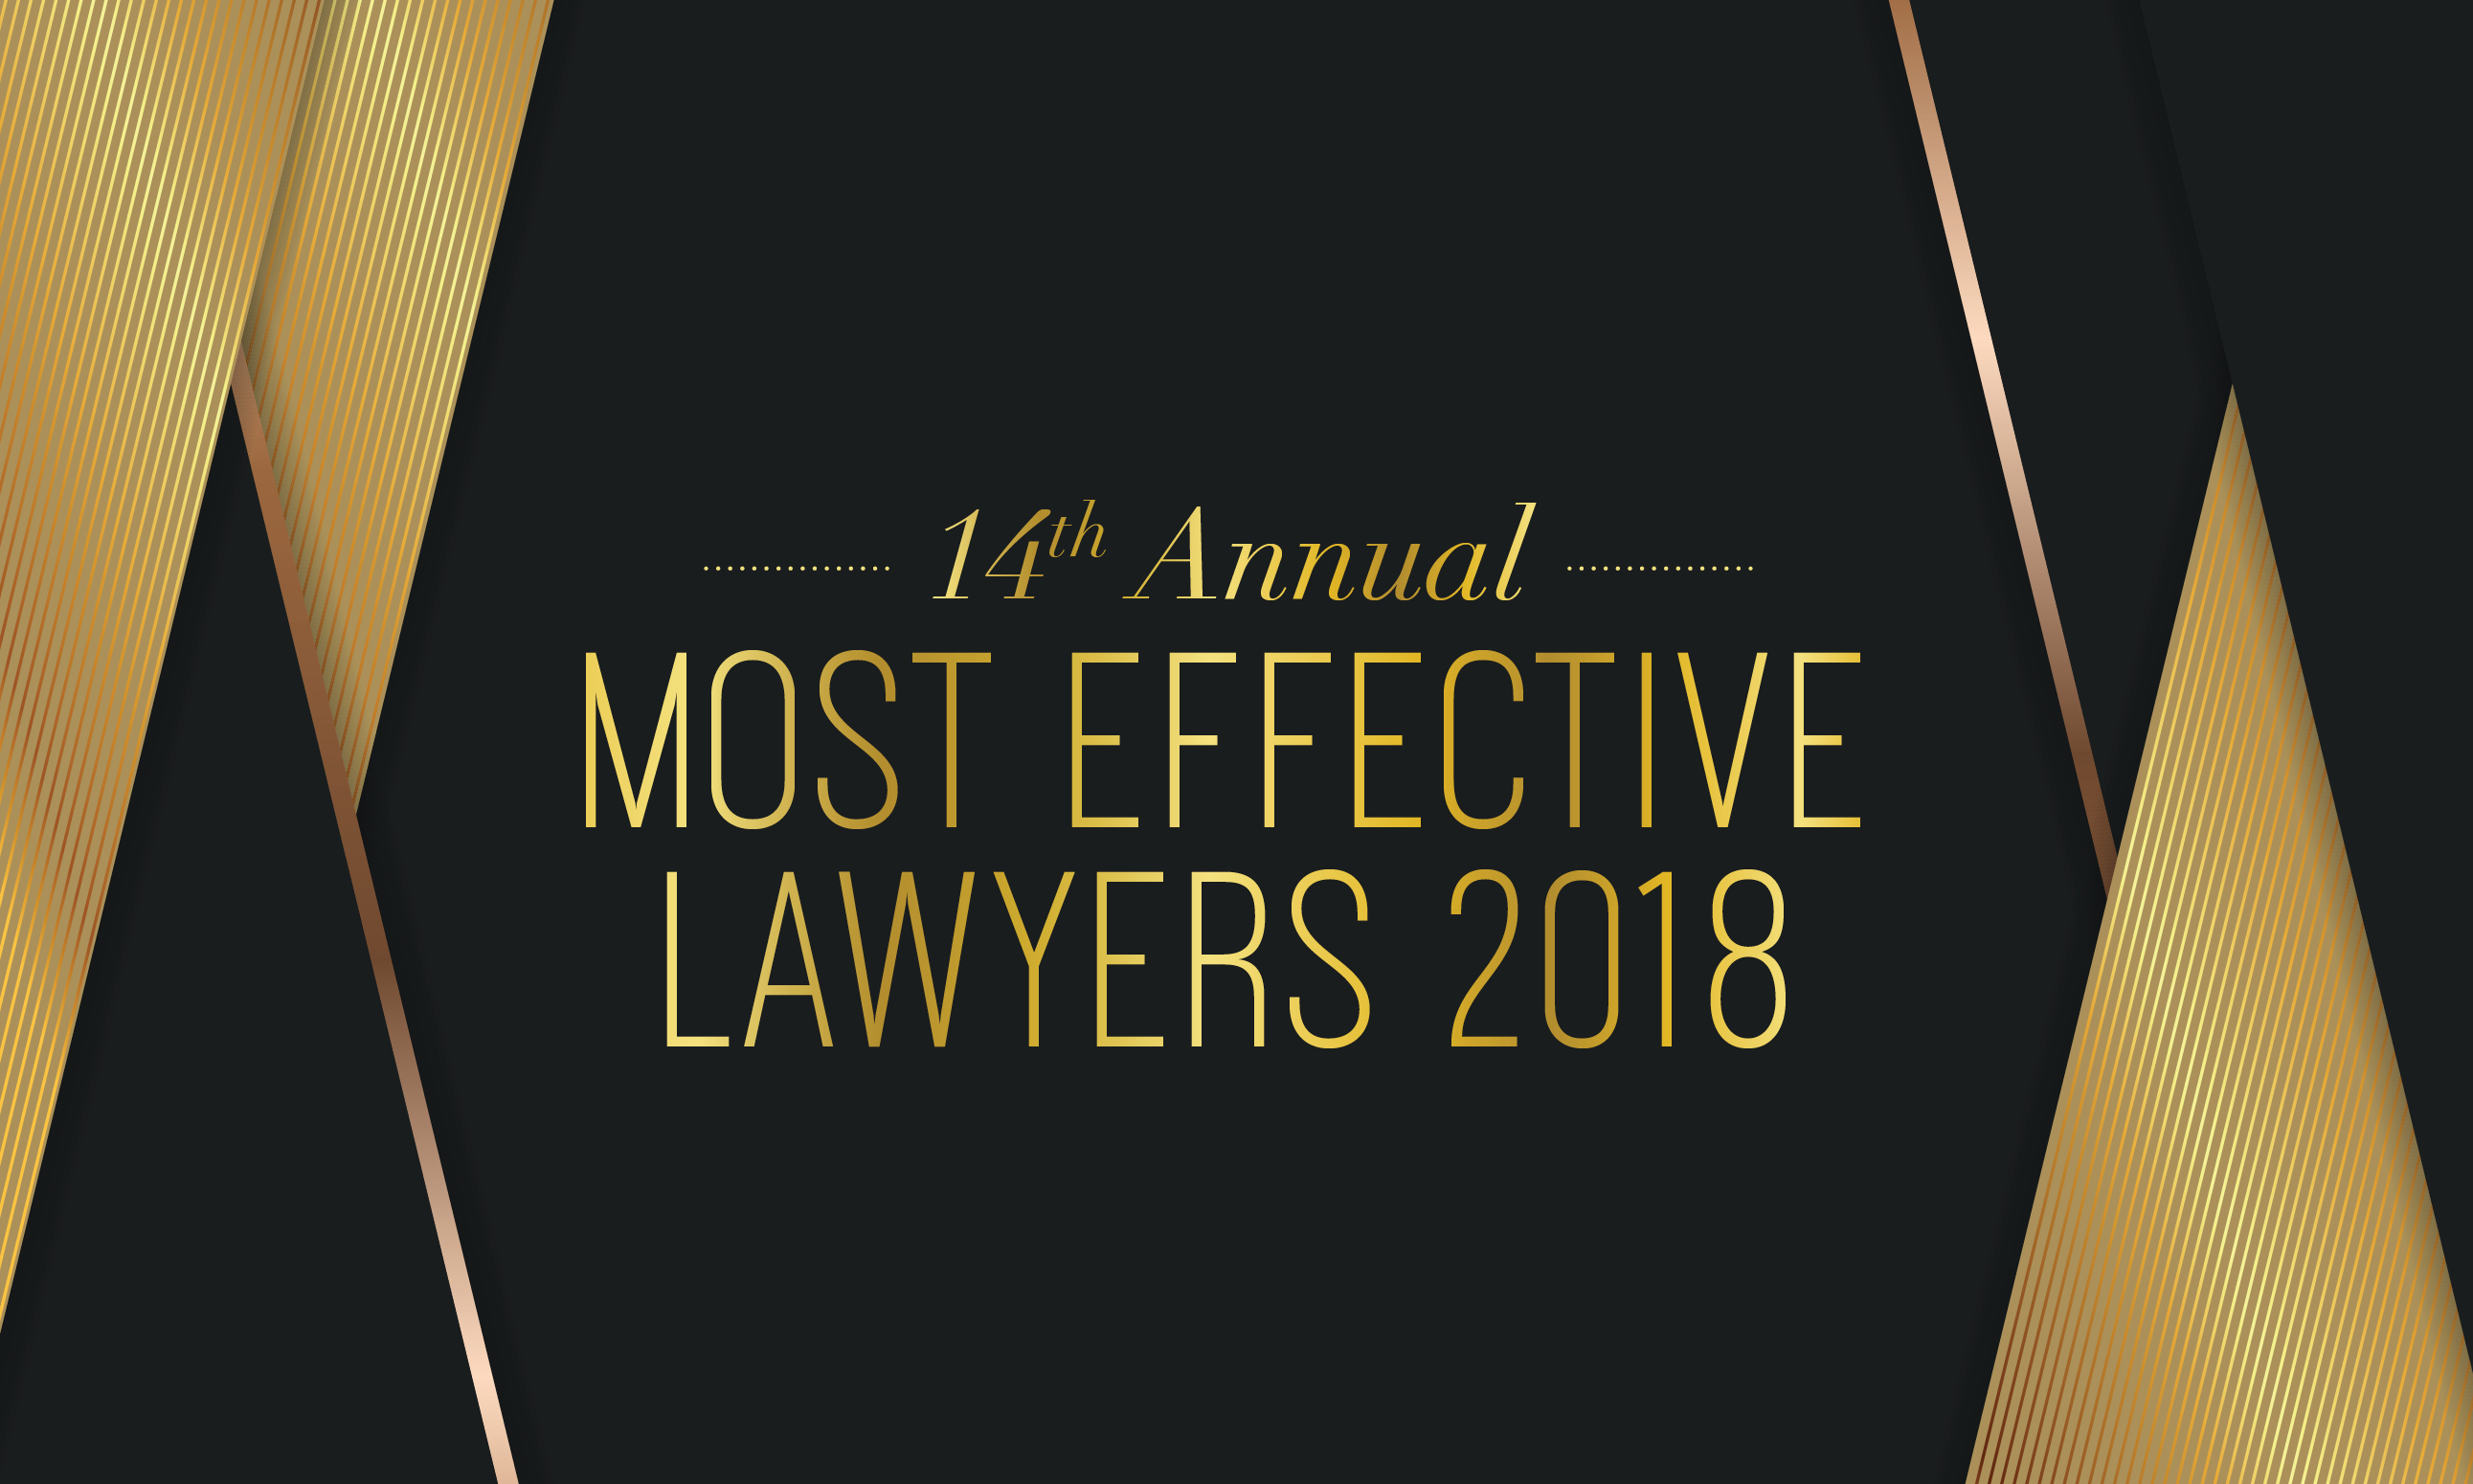 Seeking Nominations for DBR's 14th Annual Most Effective Lawyers Awards